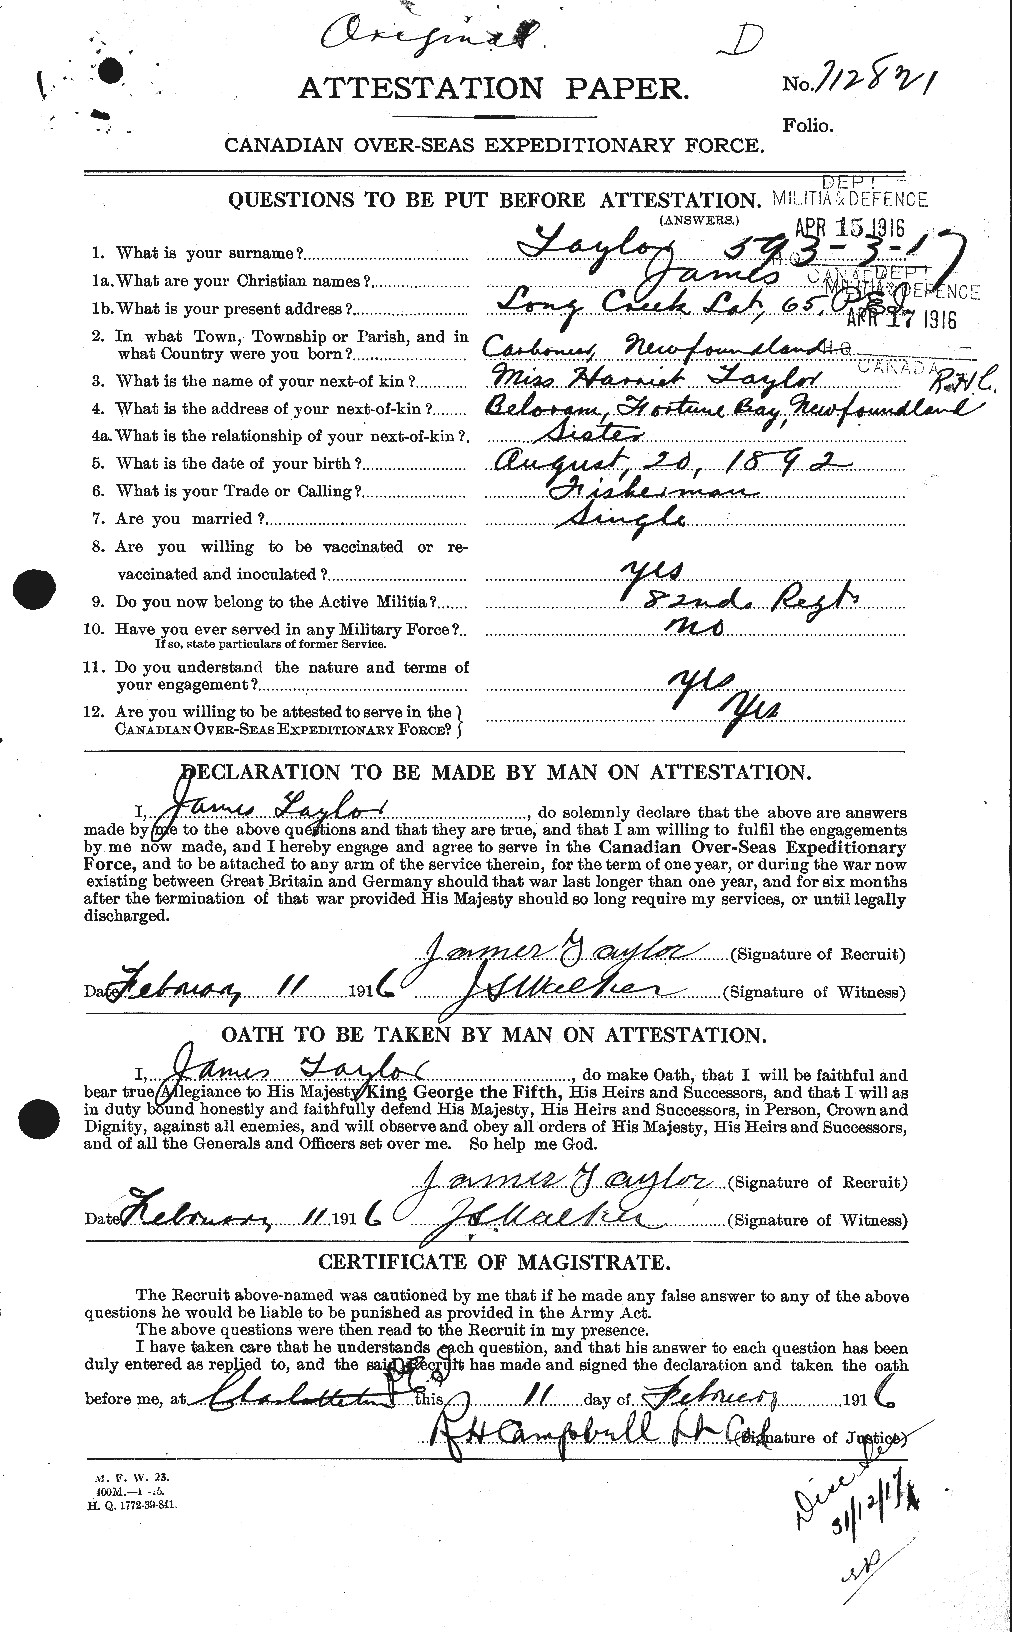 Personnel Records of the First World War - CEF 626688a